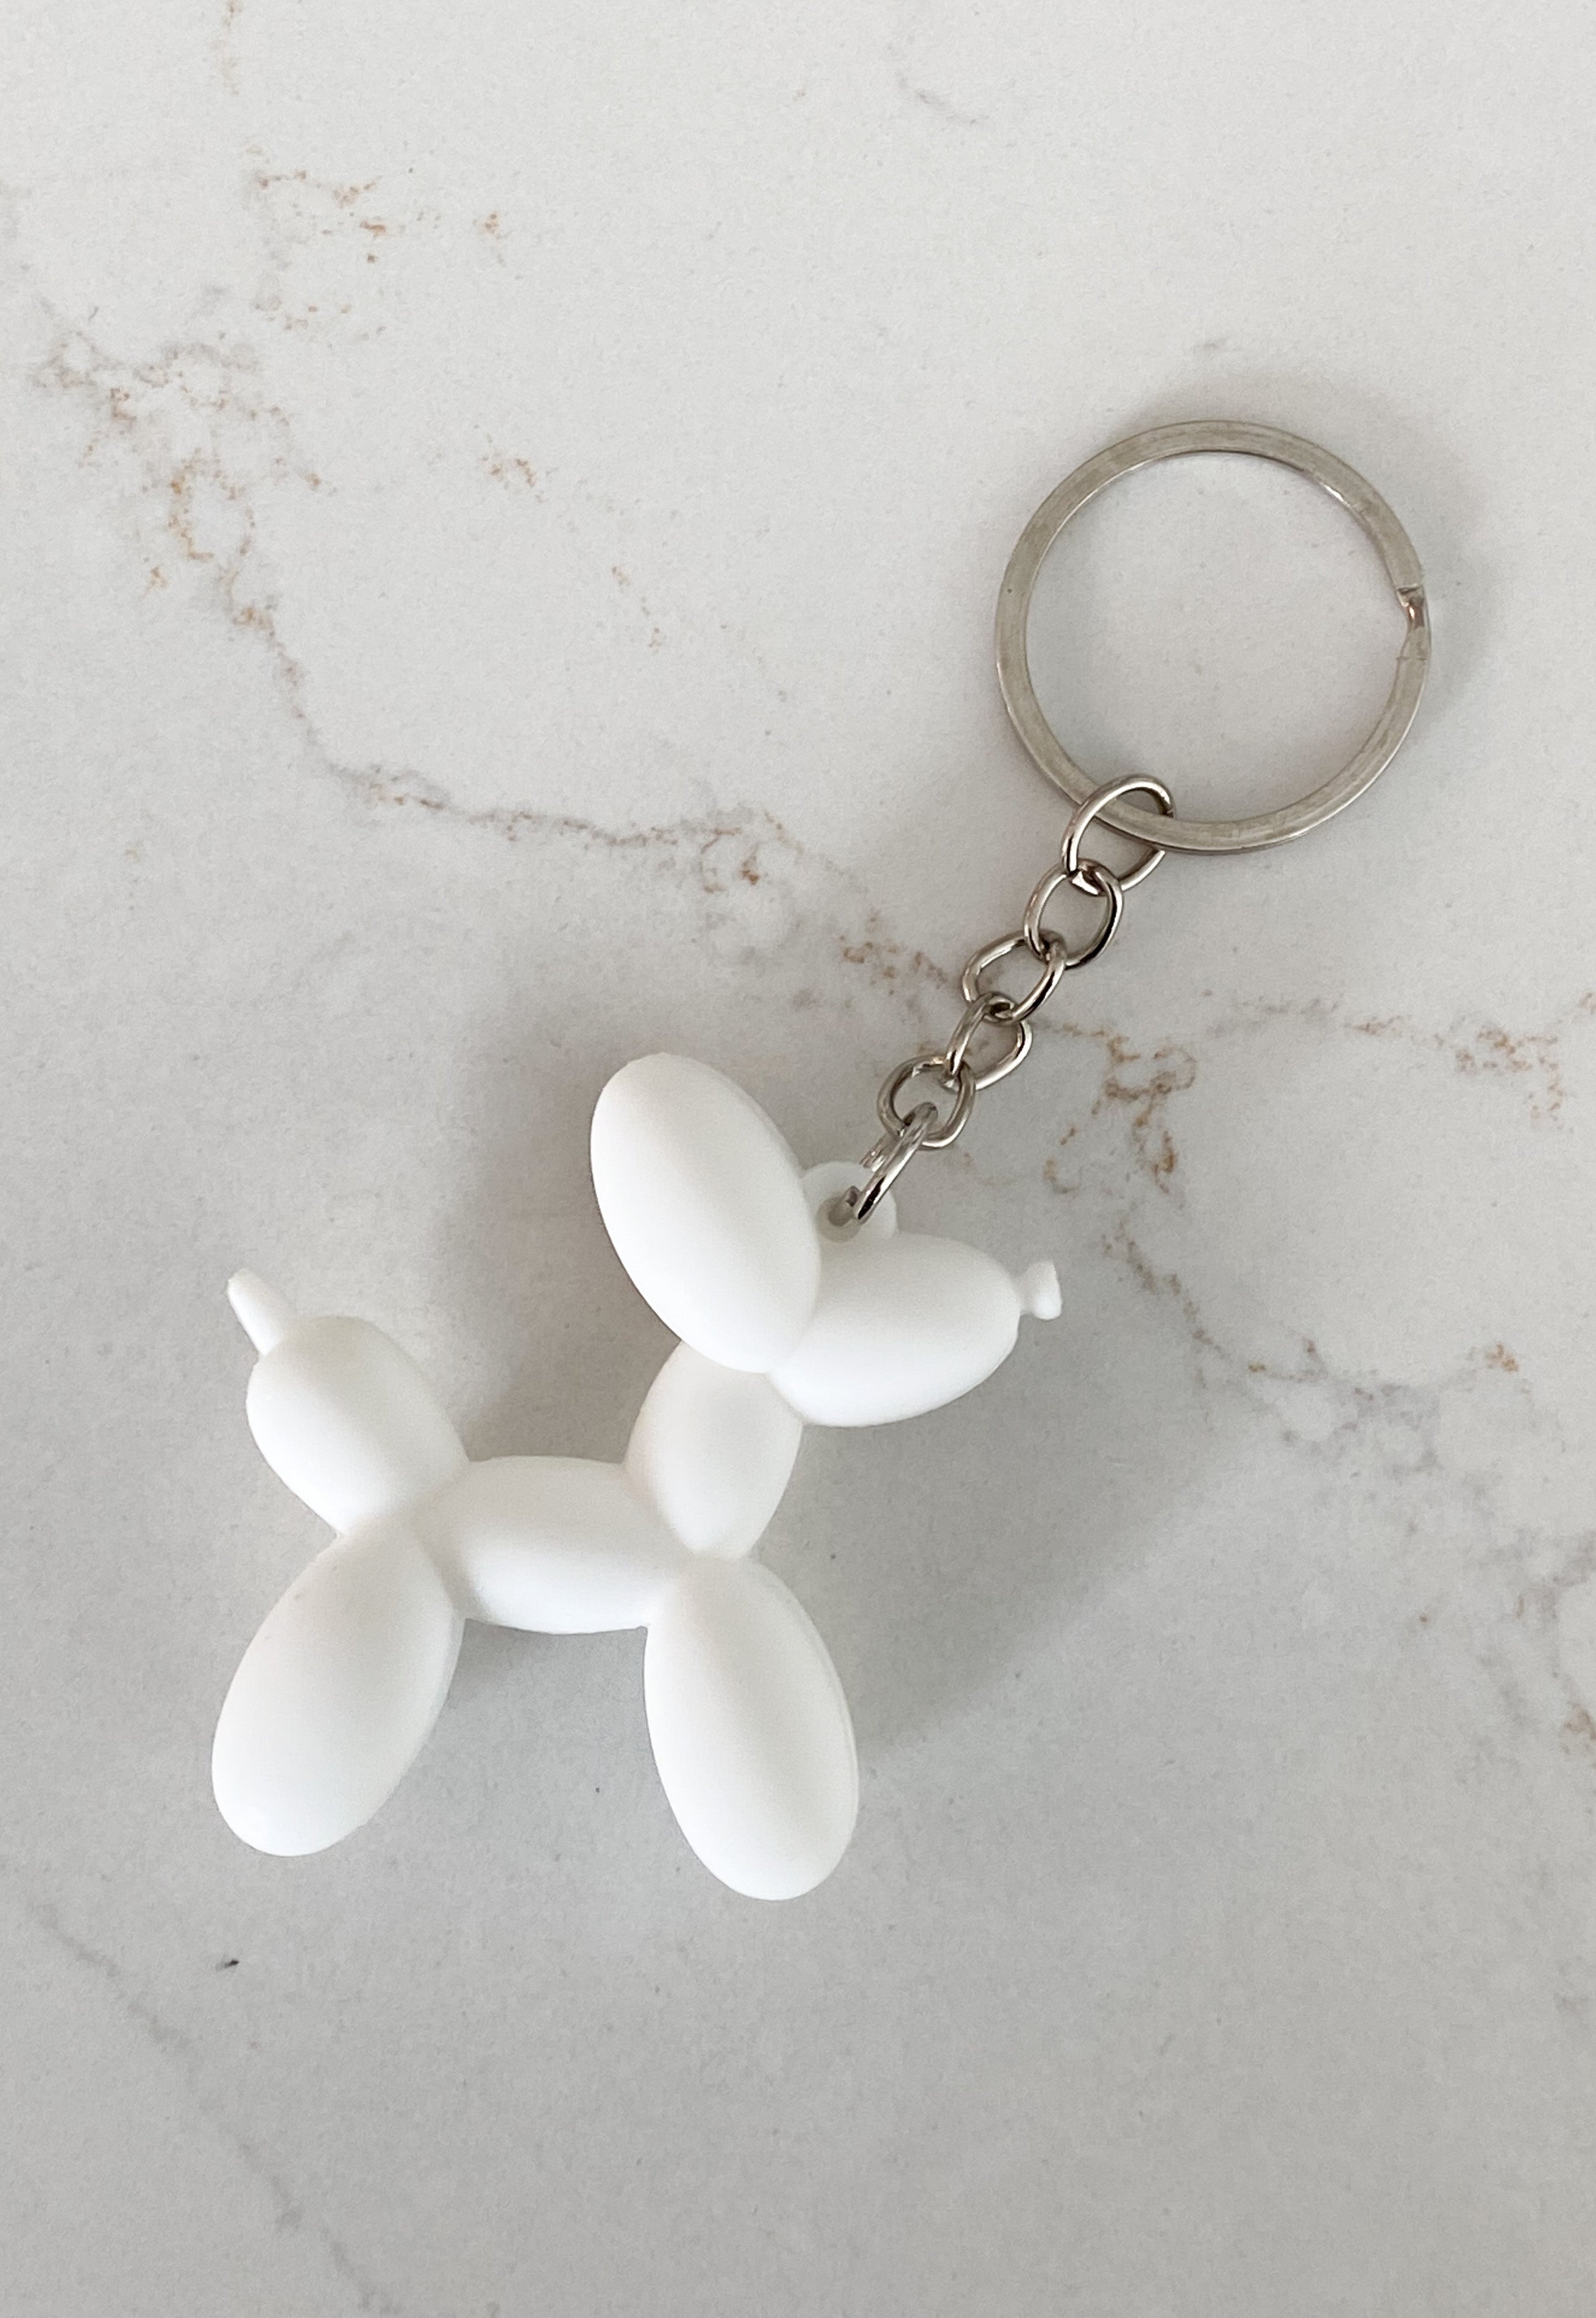 Kawaii Balloon Dog Keychain Models For Girls Sweet Ins Style Balloon Dog  Phone Chain Key Buckle Accessories Bag Pendant Toys New - Plush Keychains -  AliExpress